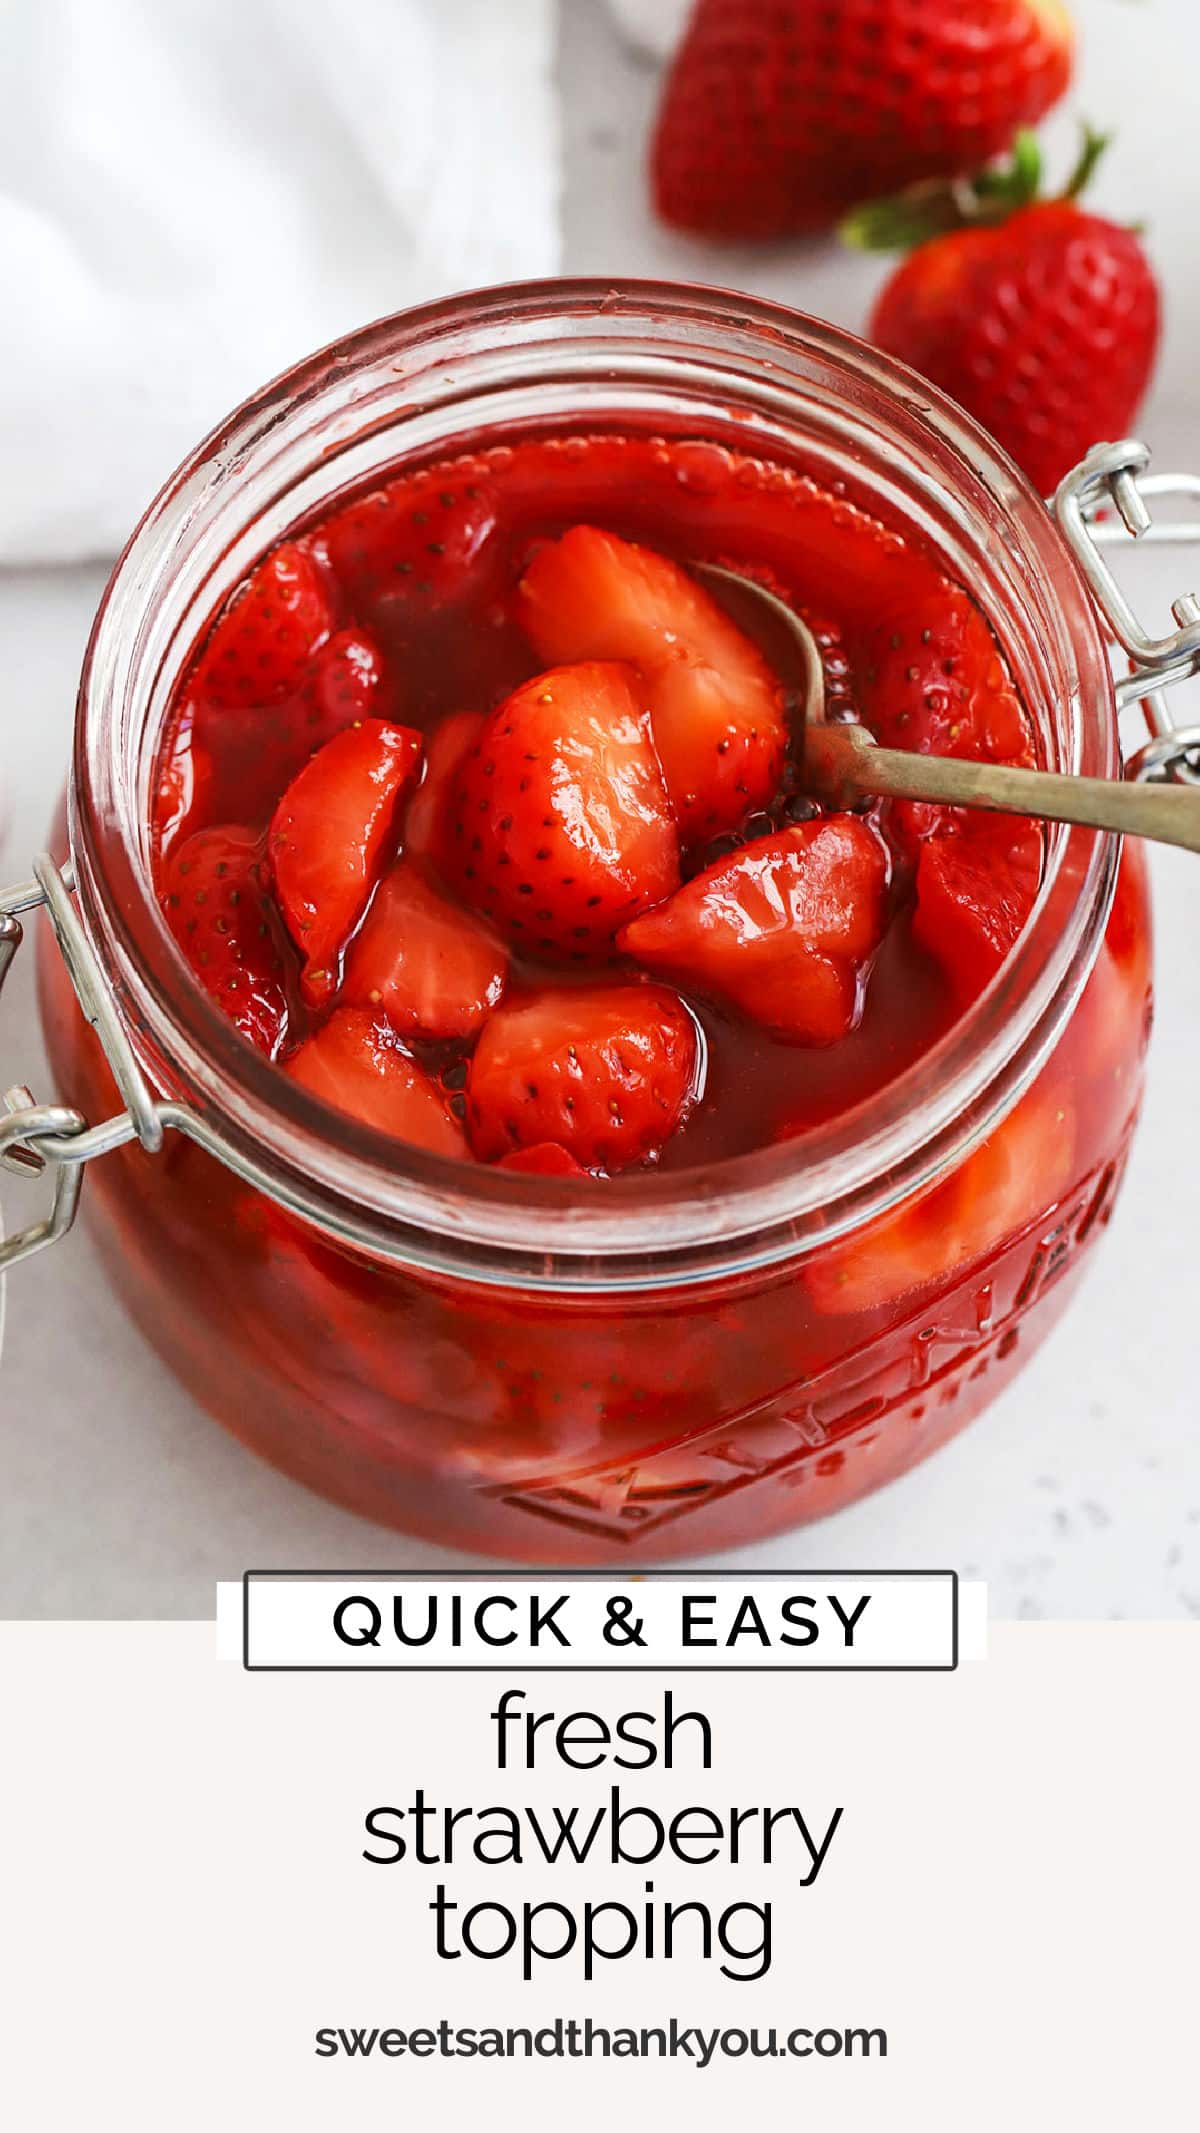 This quick & easy strawberry topping recipe is the perfect sauce for cheesecake, ice cream, waffles, strawberry shortcake, and more! / easy strawberry sauce for cheesecake / strawberry sauce for ice cream / easy strawberry topping for cheesecake / strawberry topping for angel food cake / smooth strawberry sauce recipe / how to make strawberry sauce / 